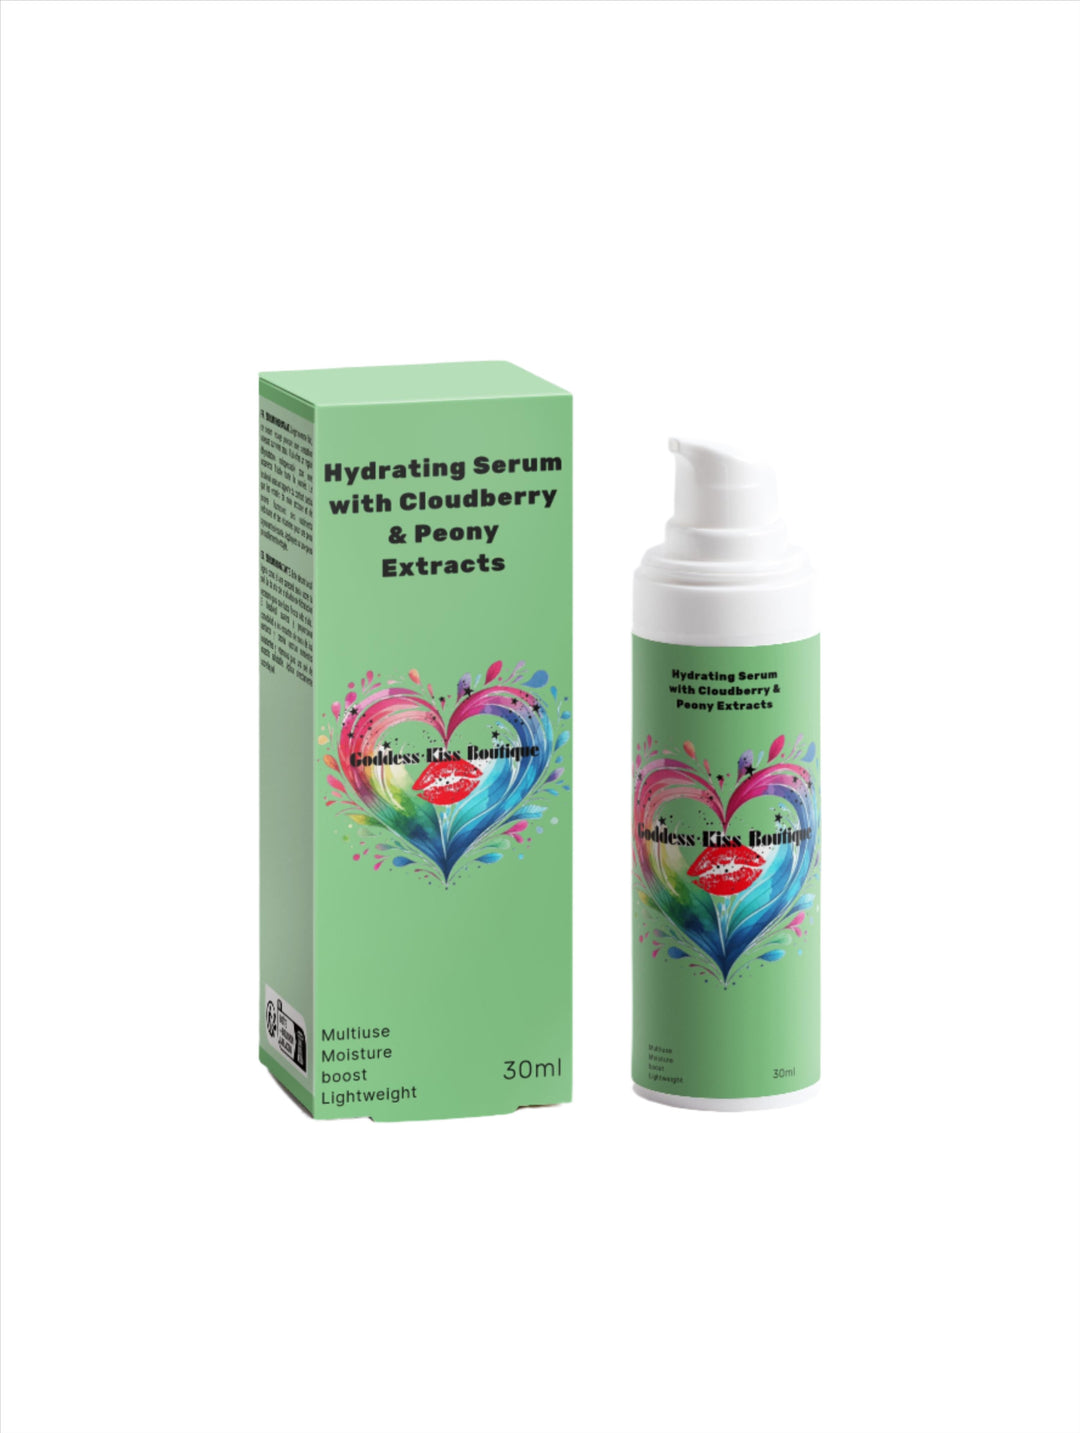 Hydrating Serum with Cloudberry & Peony Extracts - Moisture Boost Formula